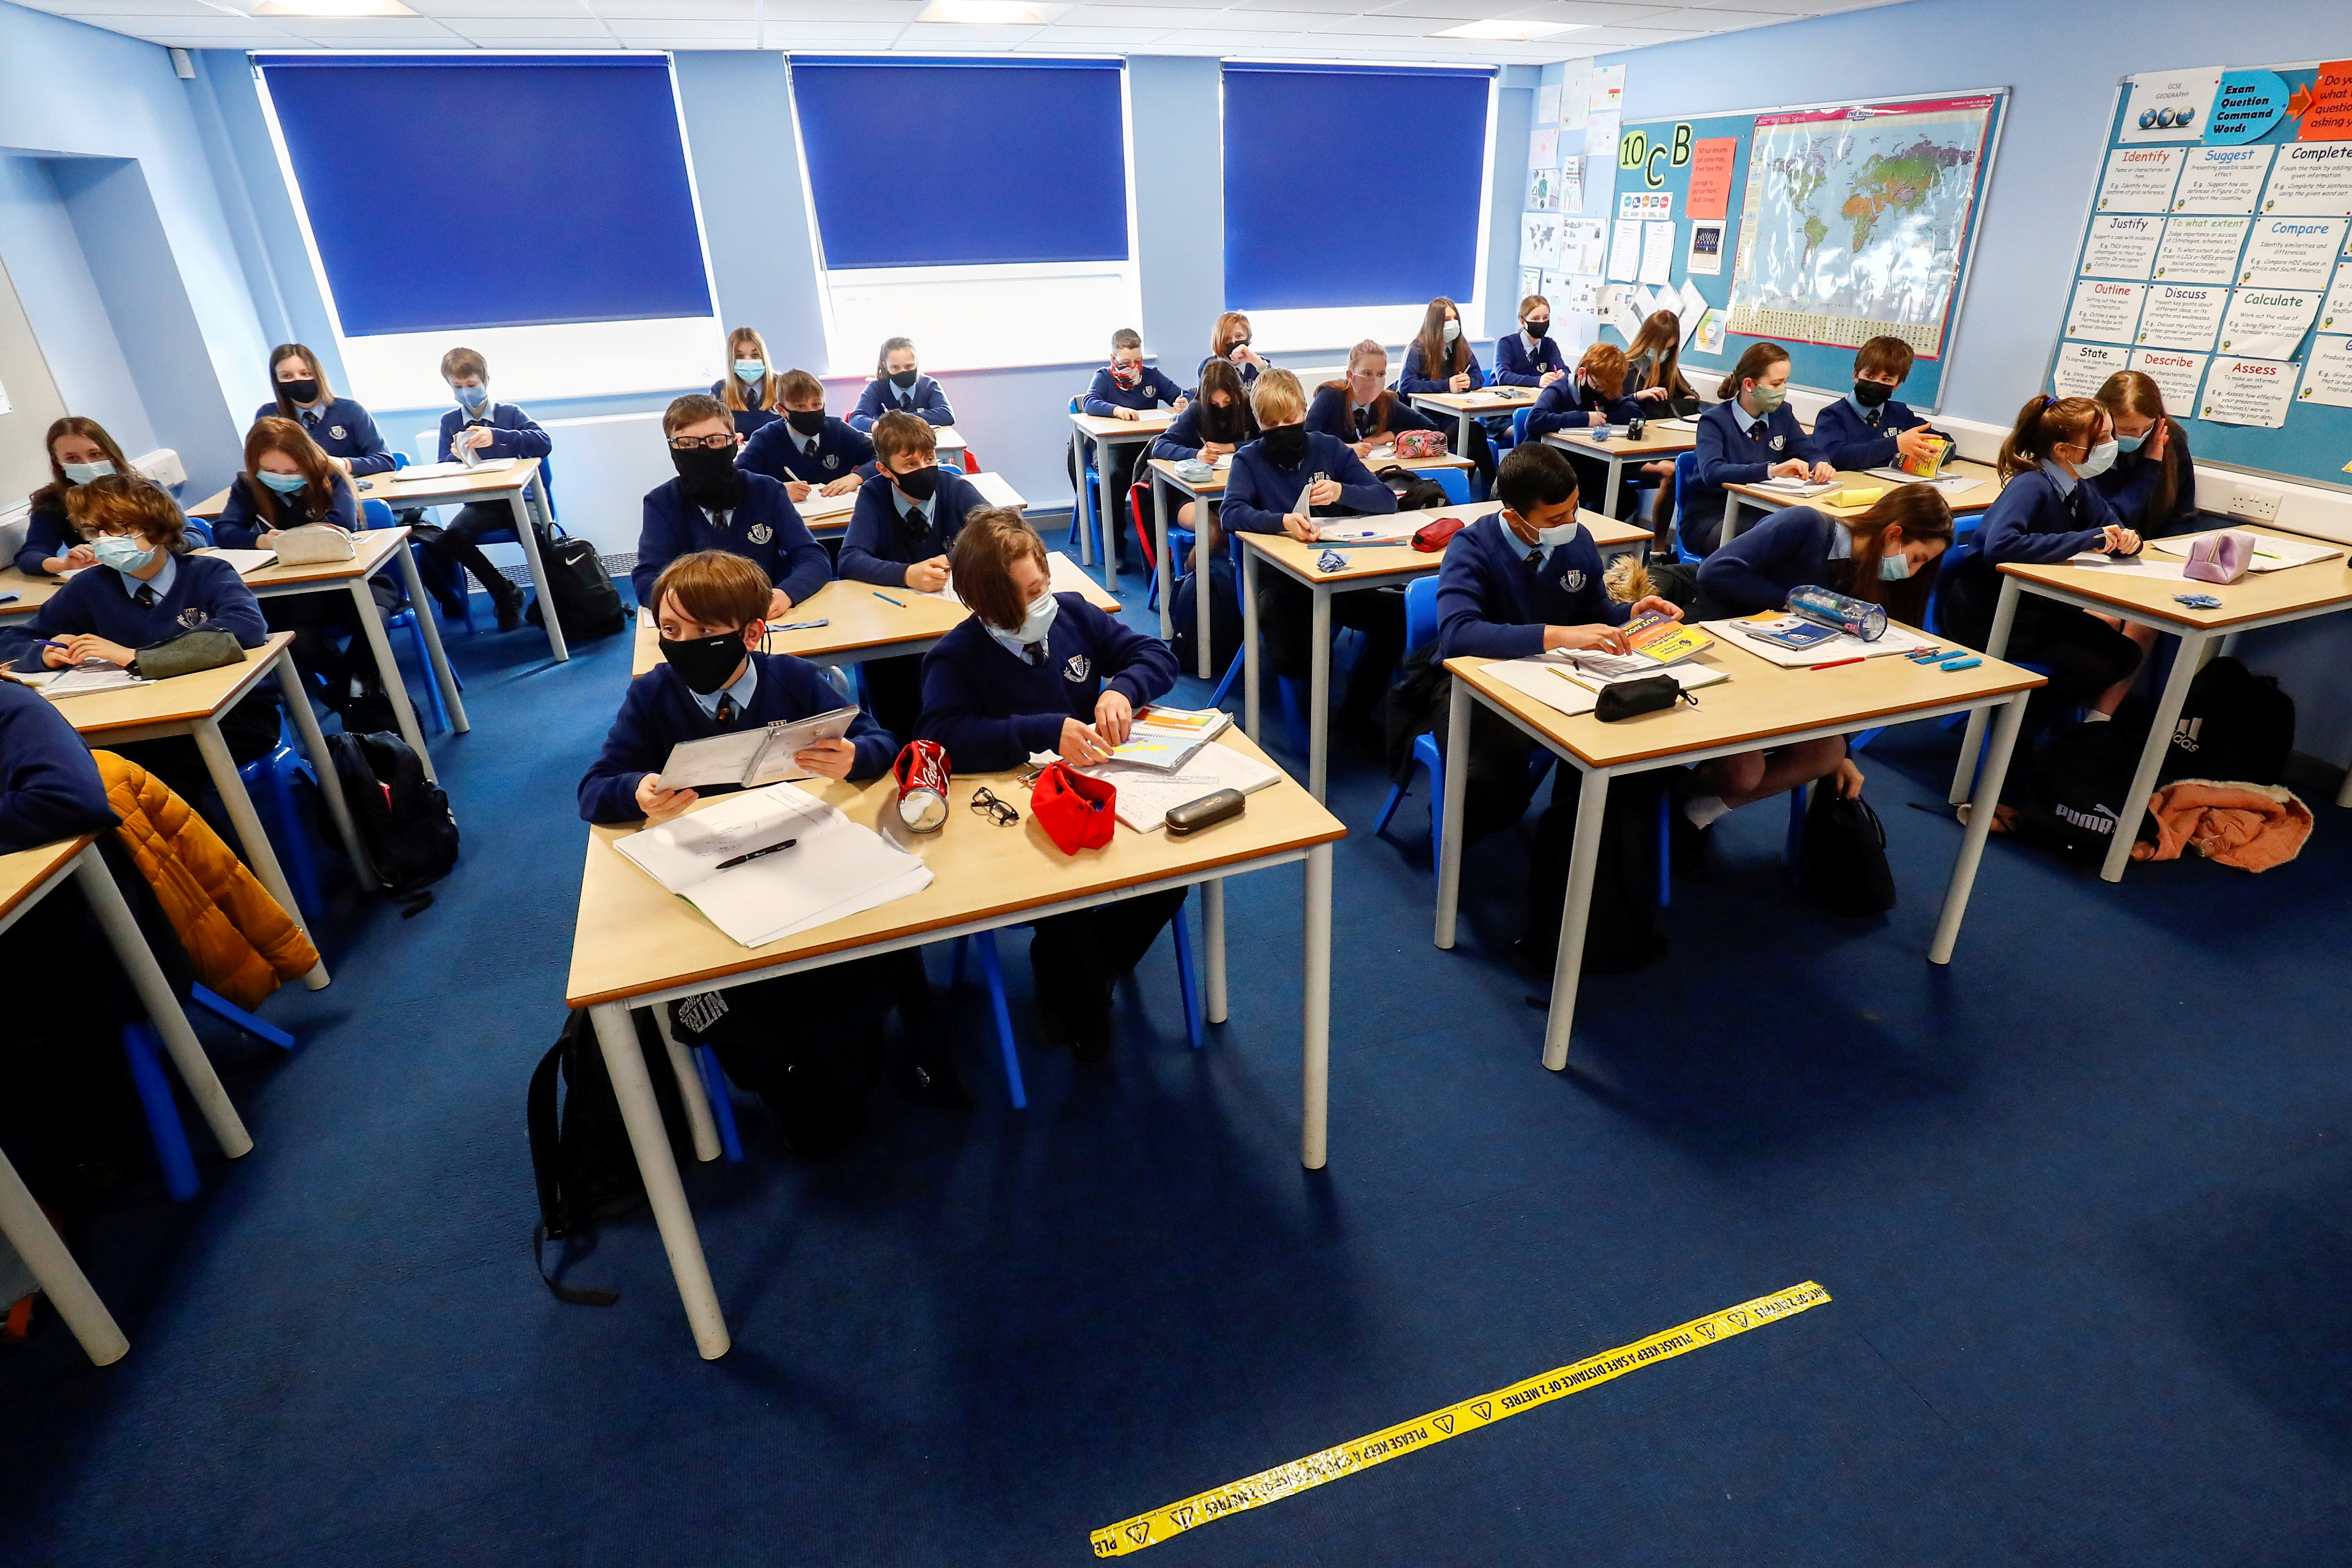 Students attend a lesson at Weaverham High School, as the coronavirus disease (COVID-19) lockdown begins to ease, in Cheshire, England, March 9, 2021. REUTERS/Jason Cairnduff